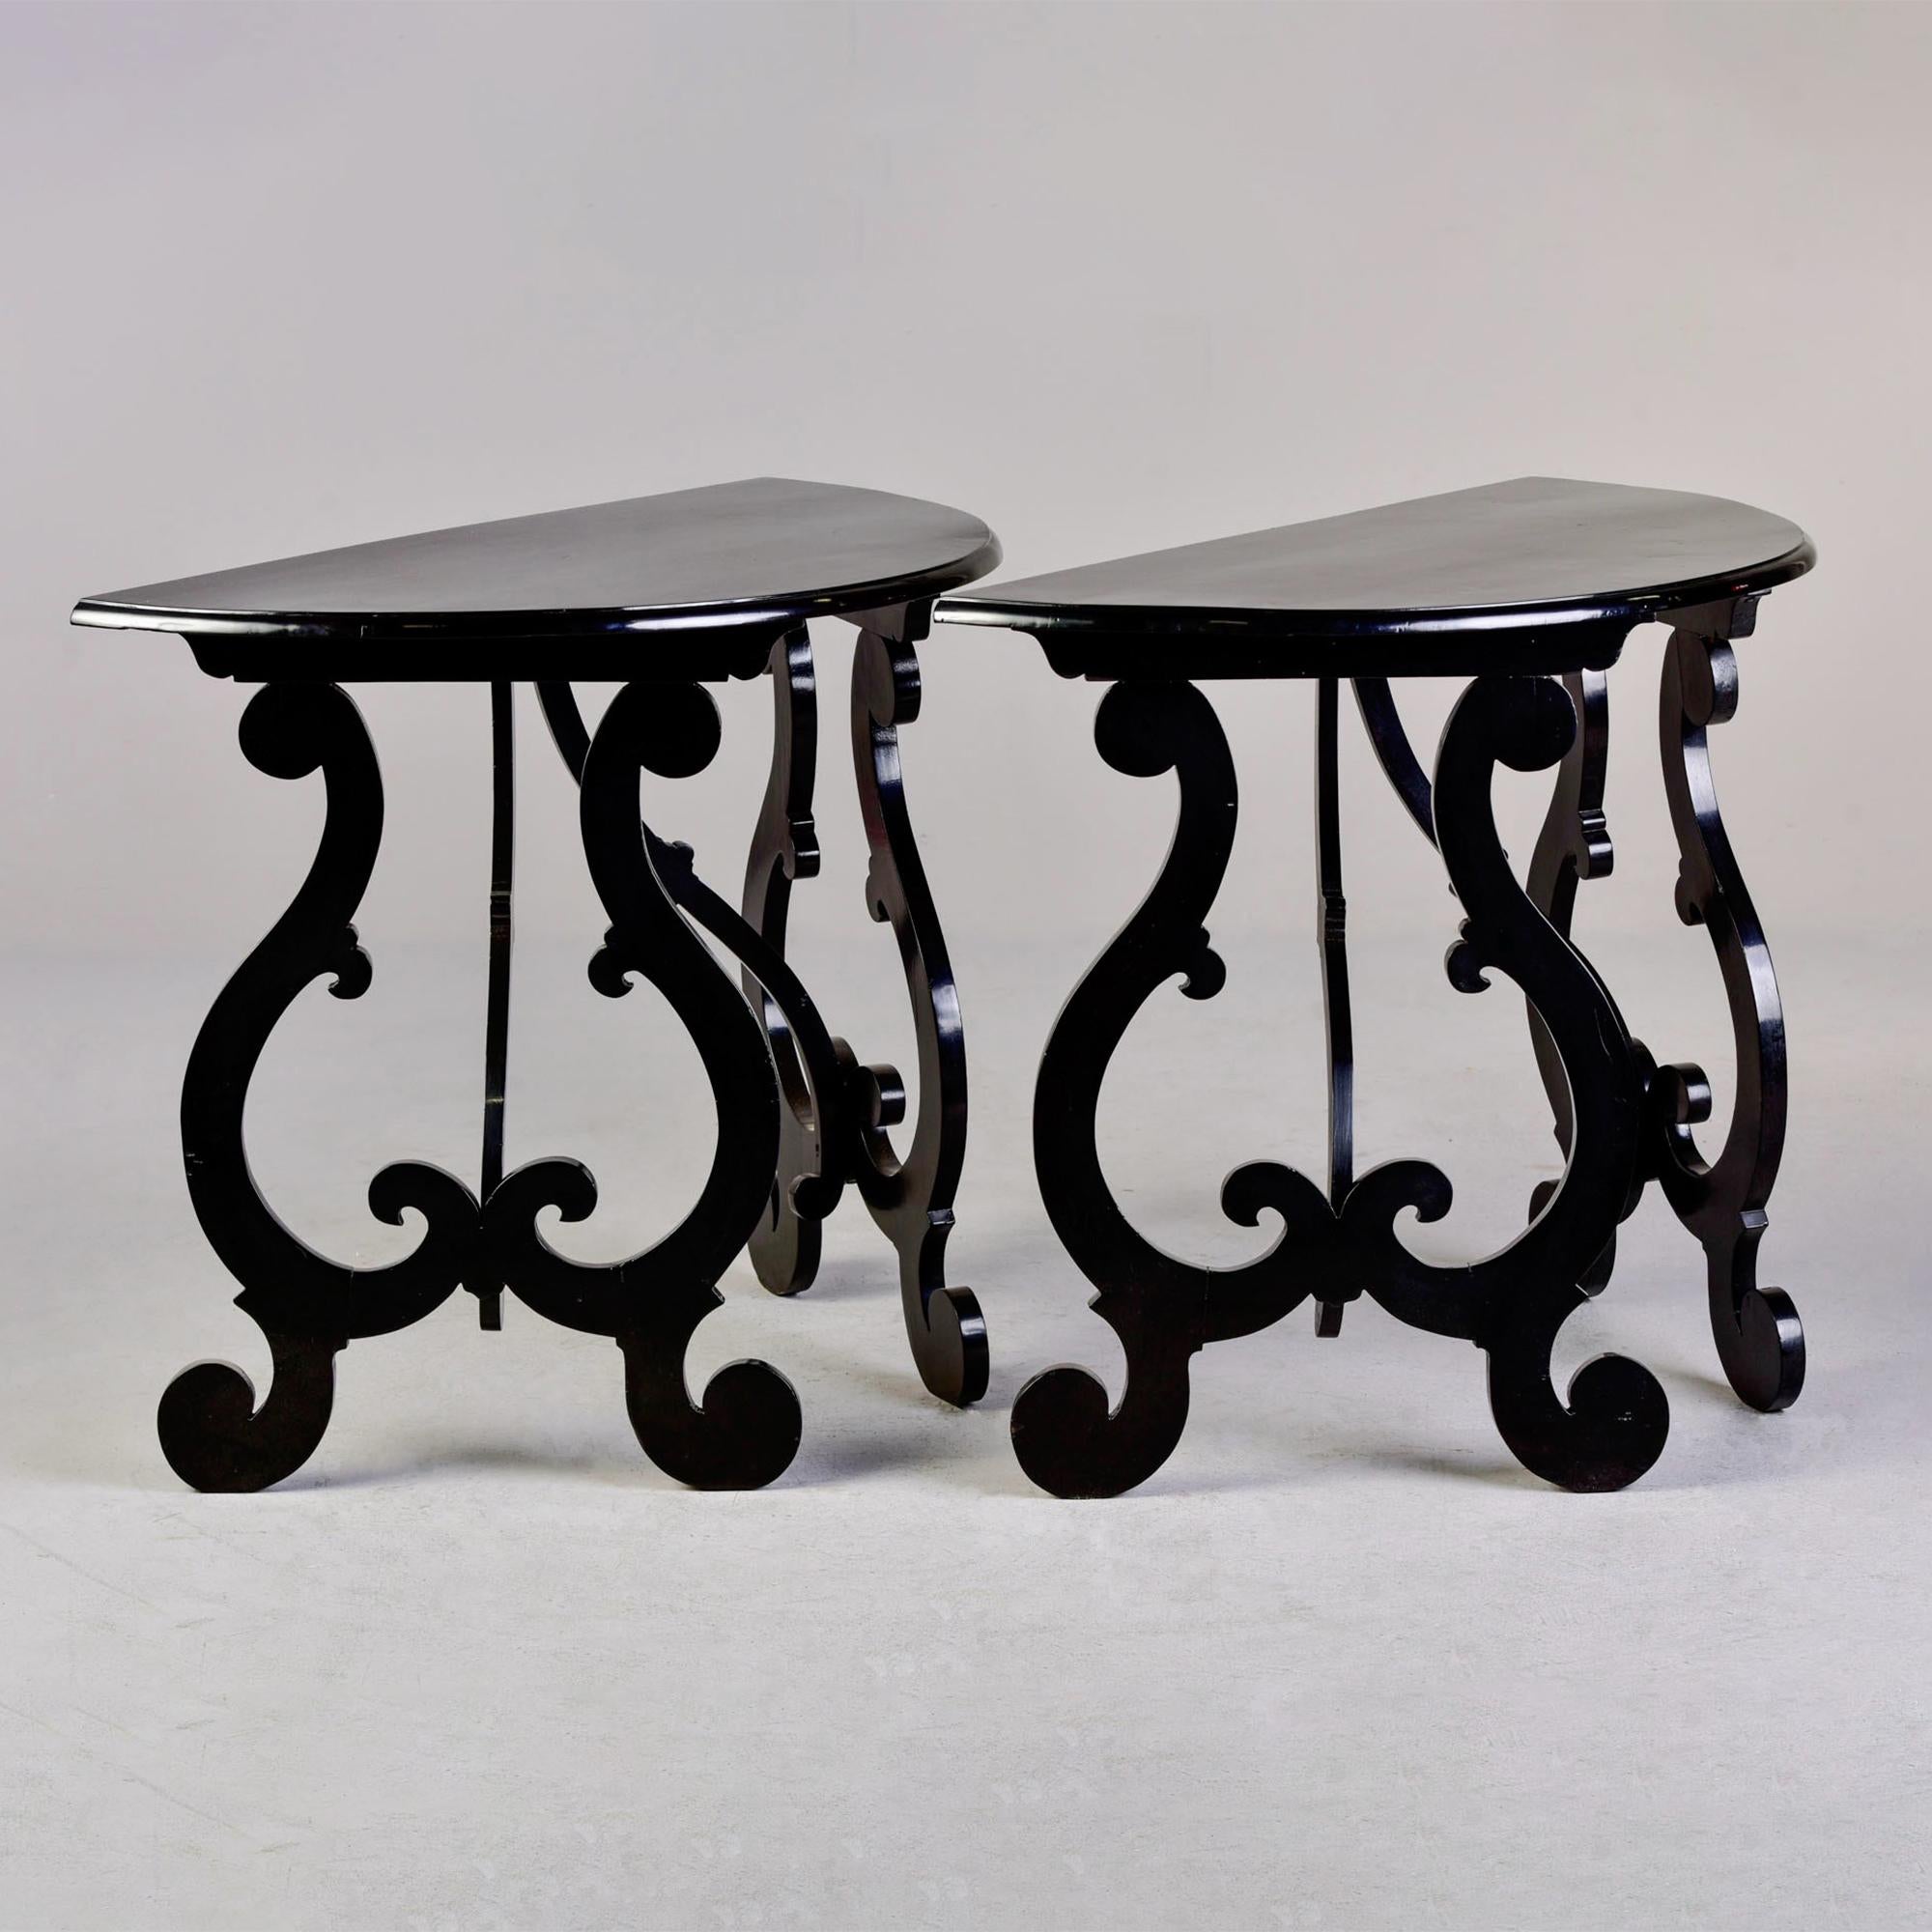 Circa 1920s pair of Italian walnut demi lune consoles with fancy, carved lyre legs and new, professional ebonised finish. Unknown maker. Sold and priced as a pair.